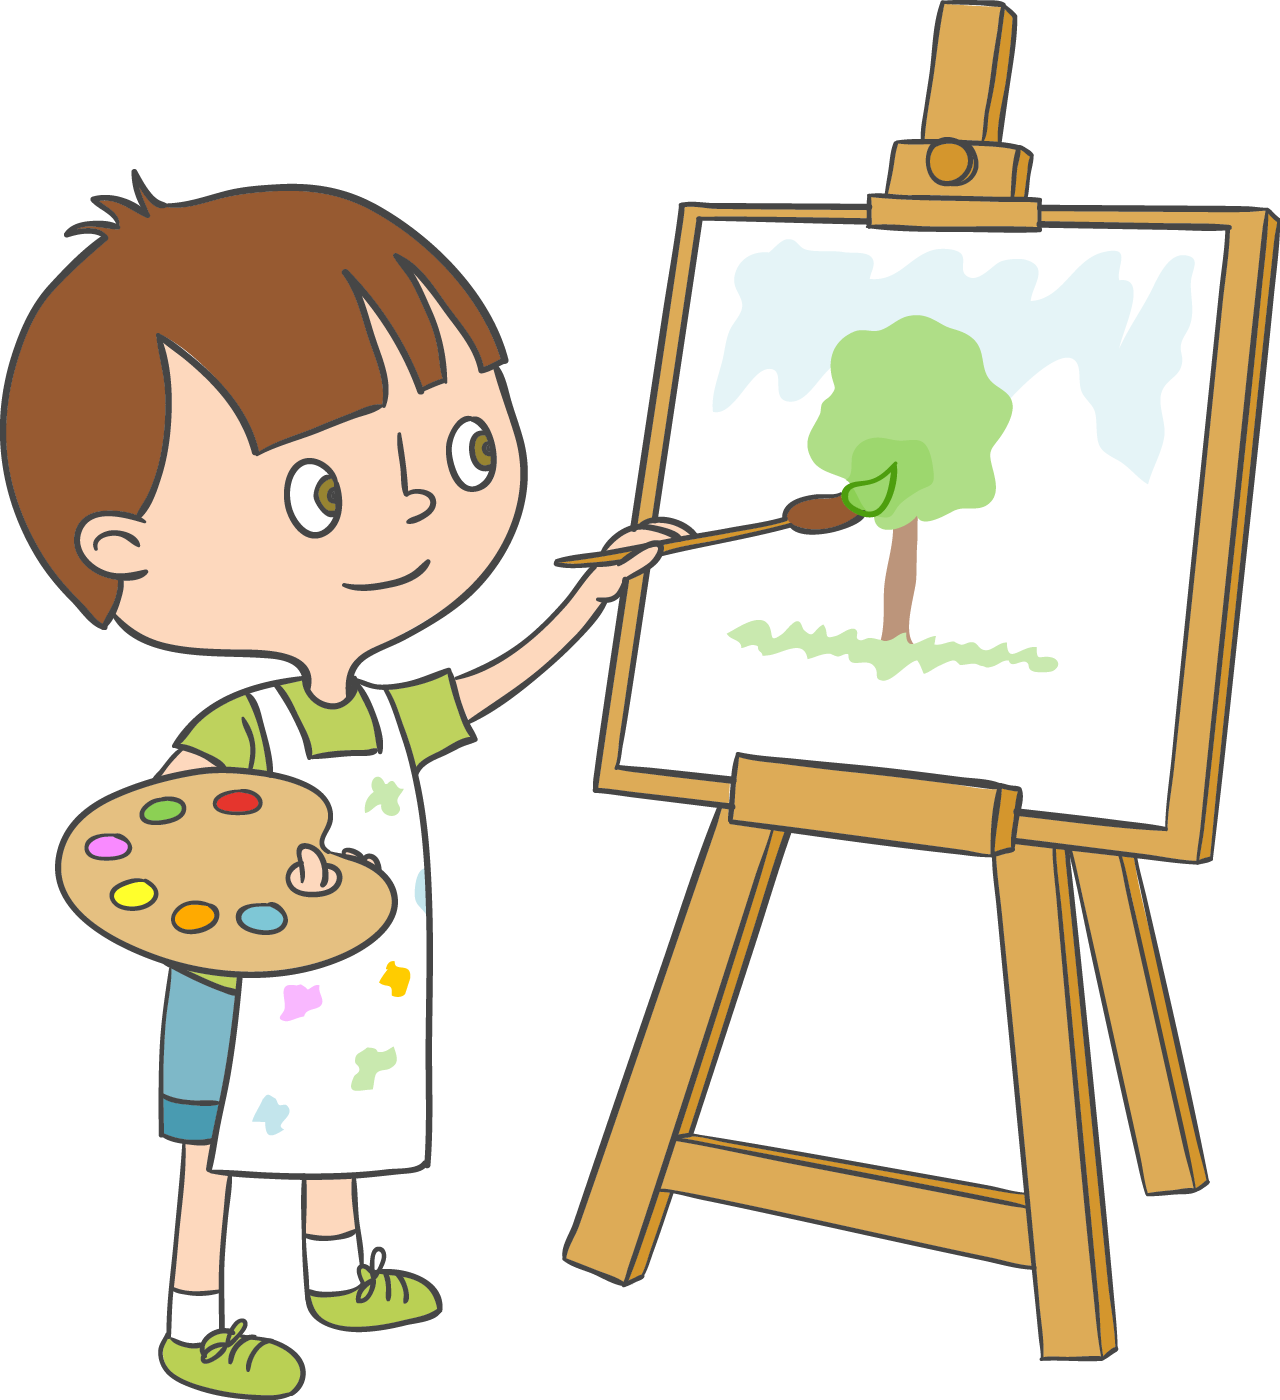 Download and share clipart about Watercolor Painting Cartoon Illustration -...